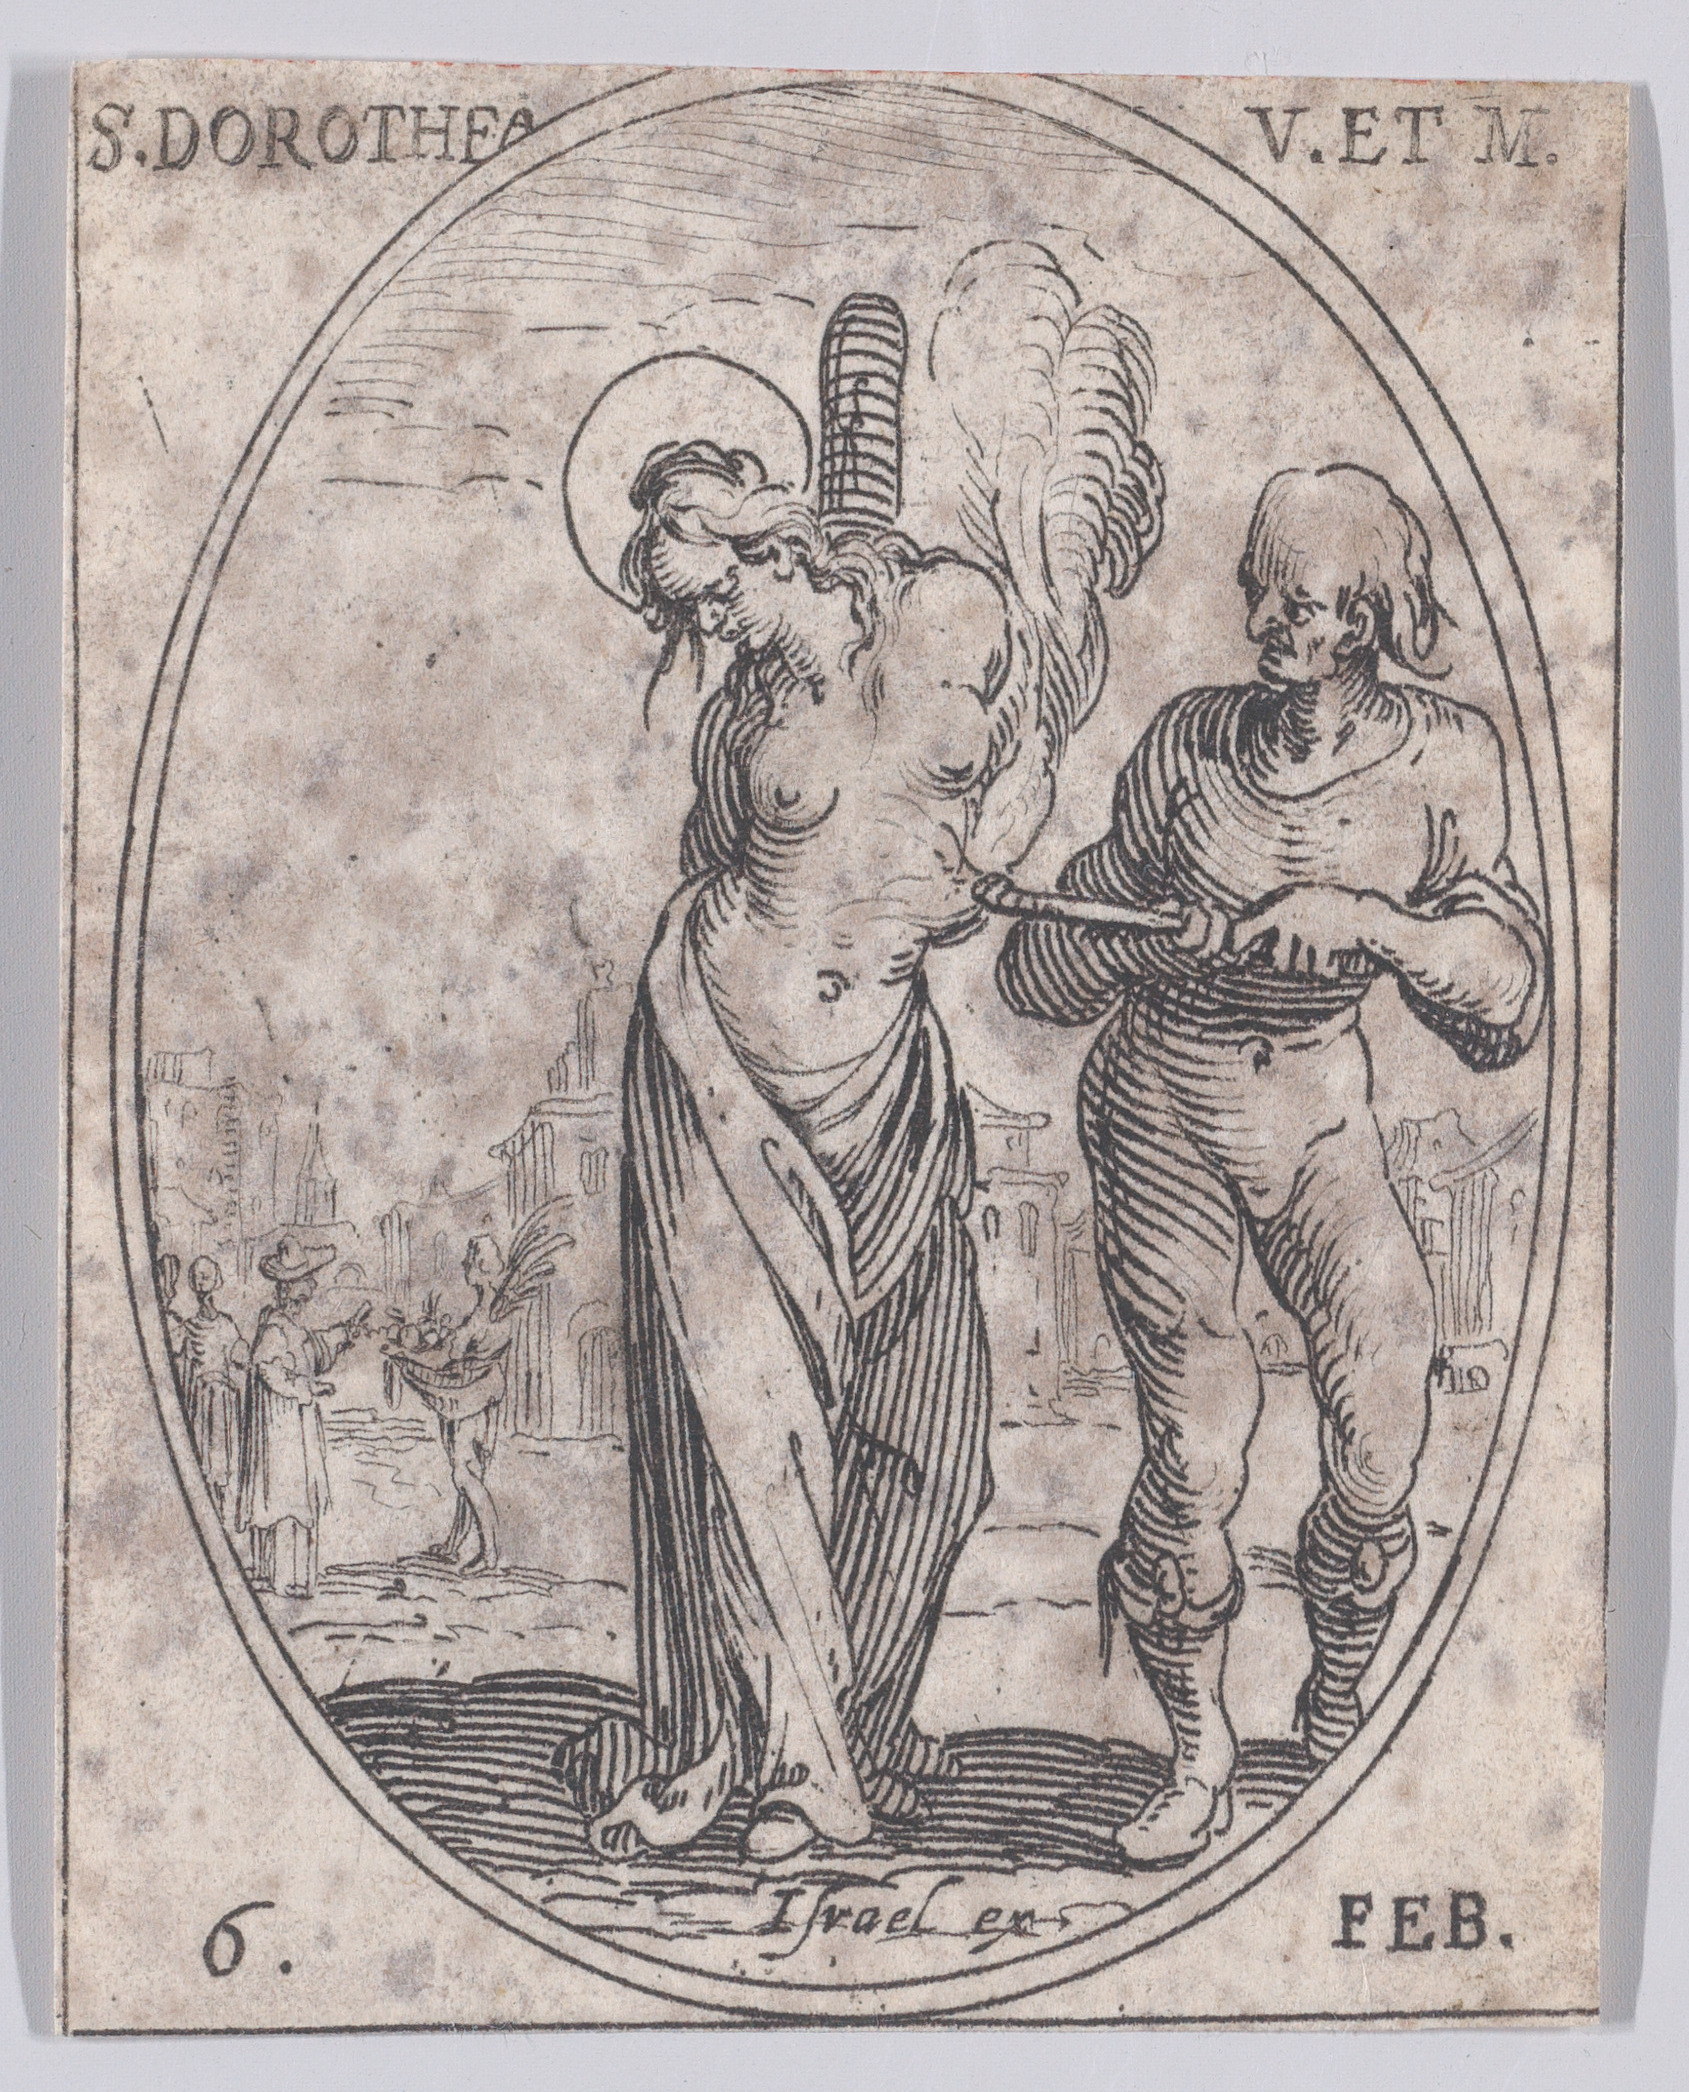 Ste. Dorothée, vierge et martyre (St. Dorothy, Virgin and Martyr), February 6th, from Les Images De Tous Les Saincts et Saintes de L'Année (Images of All of the Saints and Religious Events of the Year), Jacques Callot (French, Nancy 1592–1635 Nancy), Etching; second state of two (Lieure)